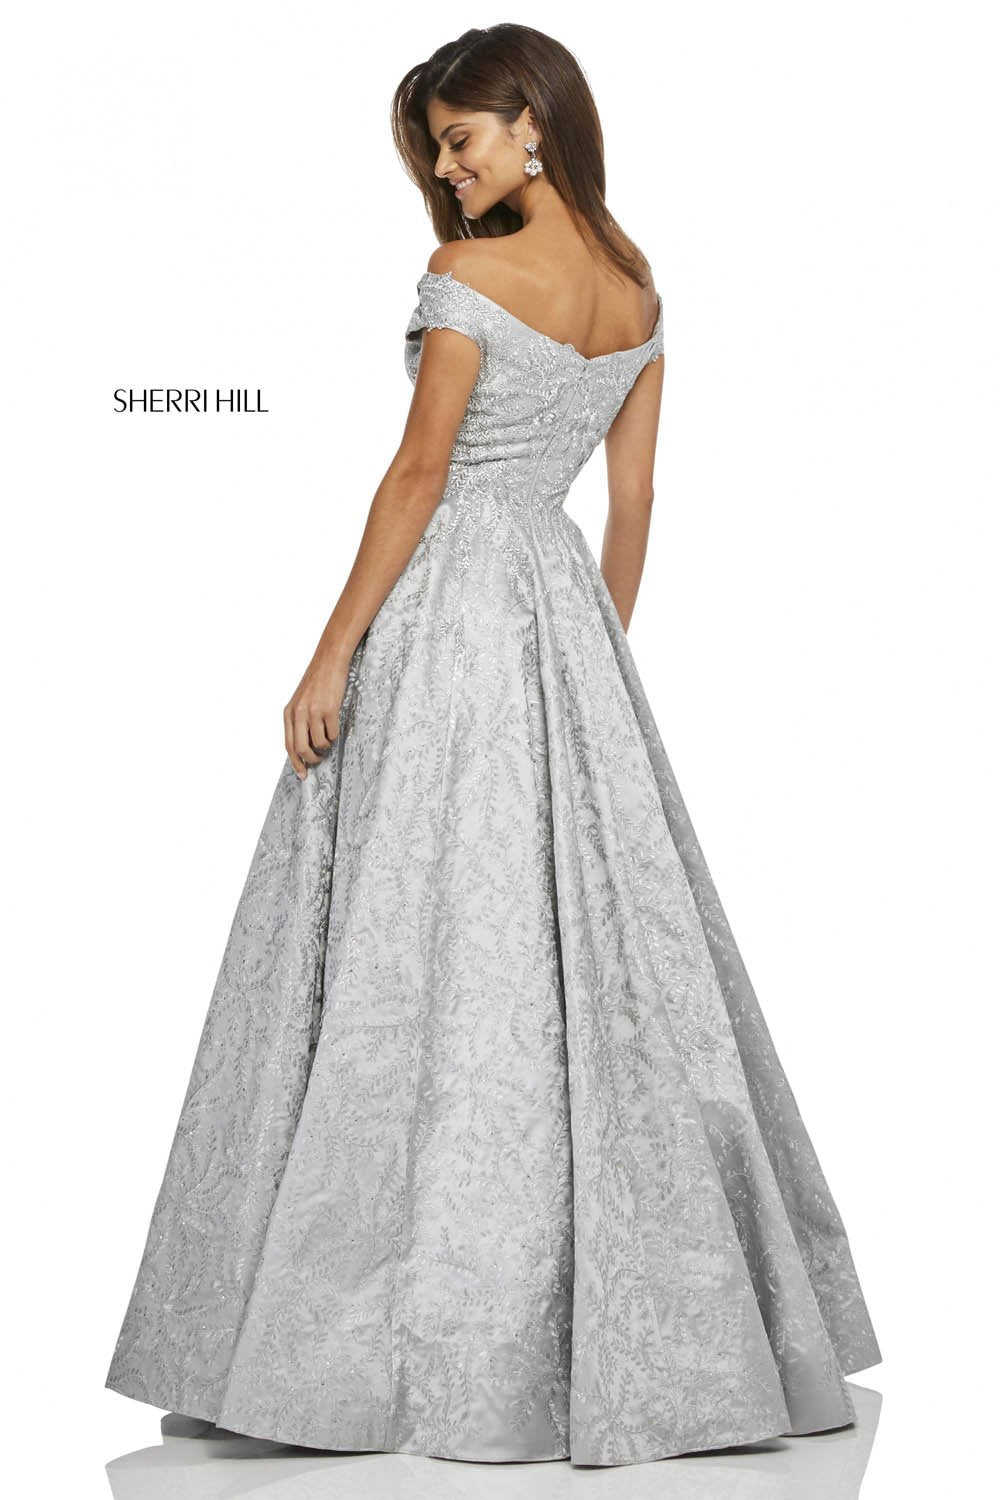 Sherri Hill 52507 dress images in these colors: Silver.